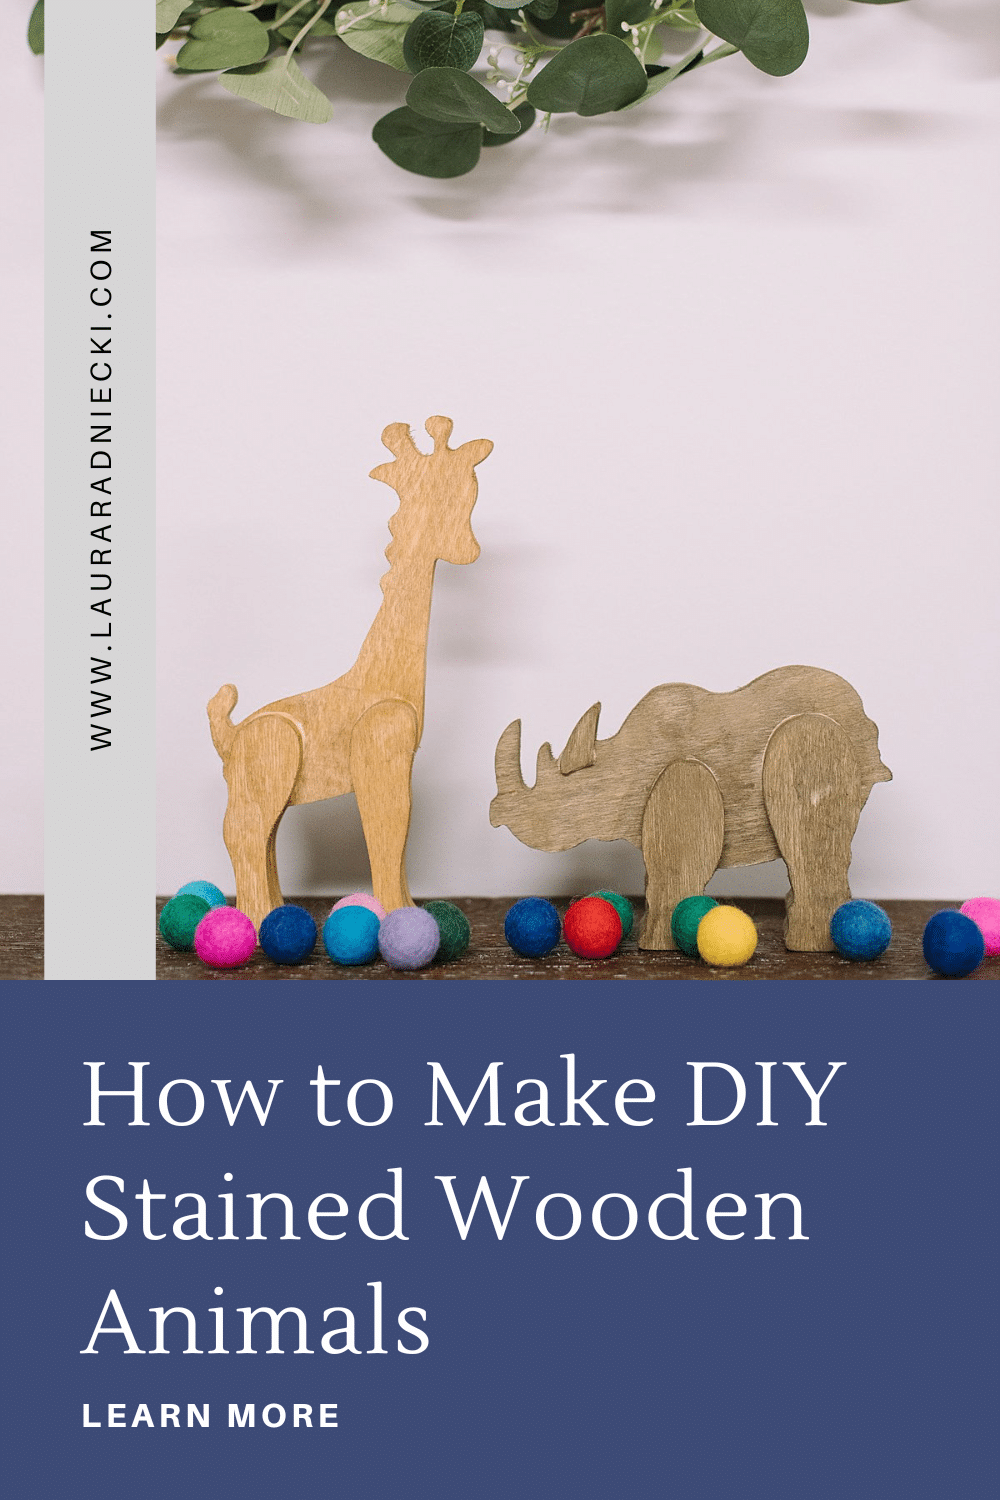 How to Make DIY Stained Wooden Animals